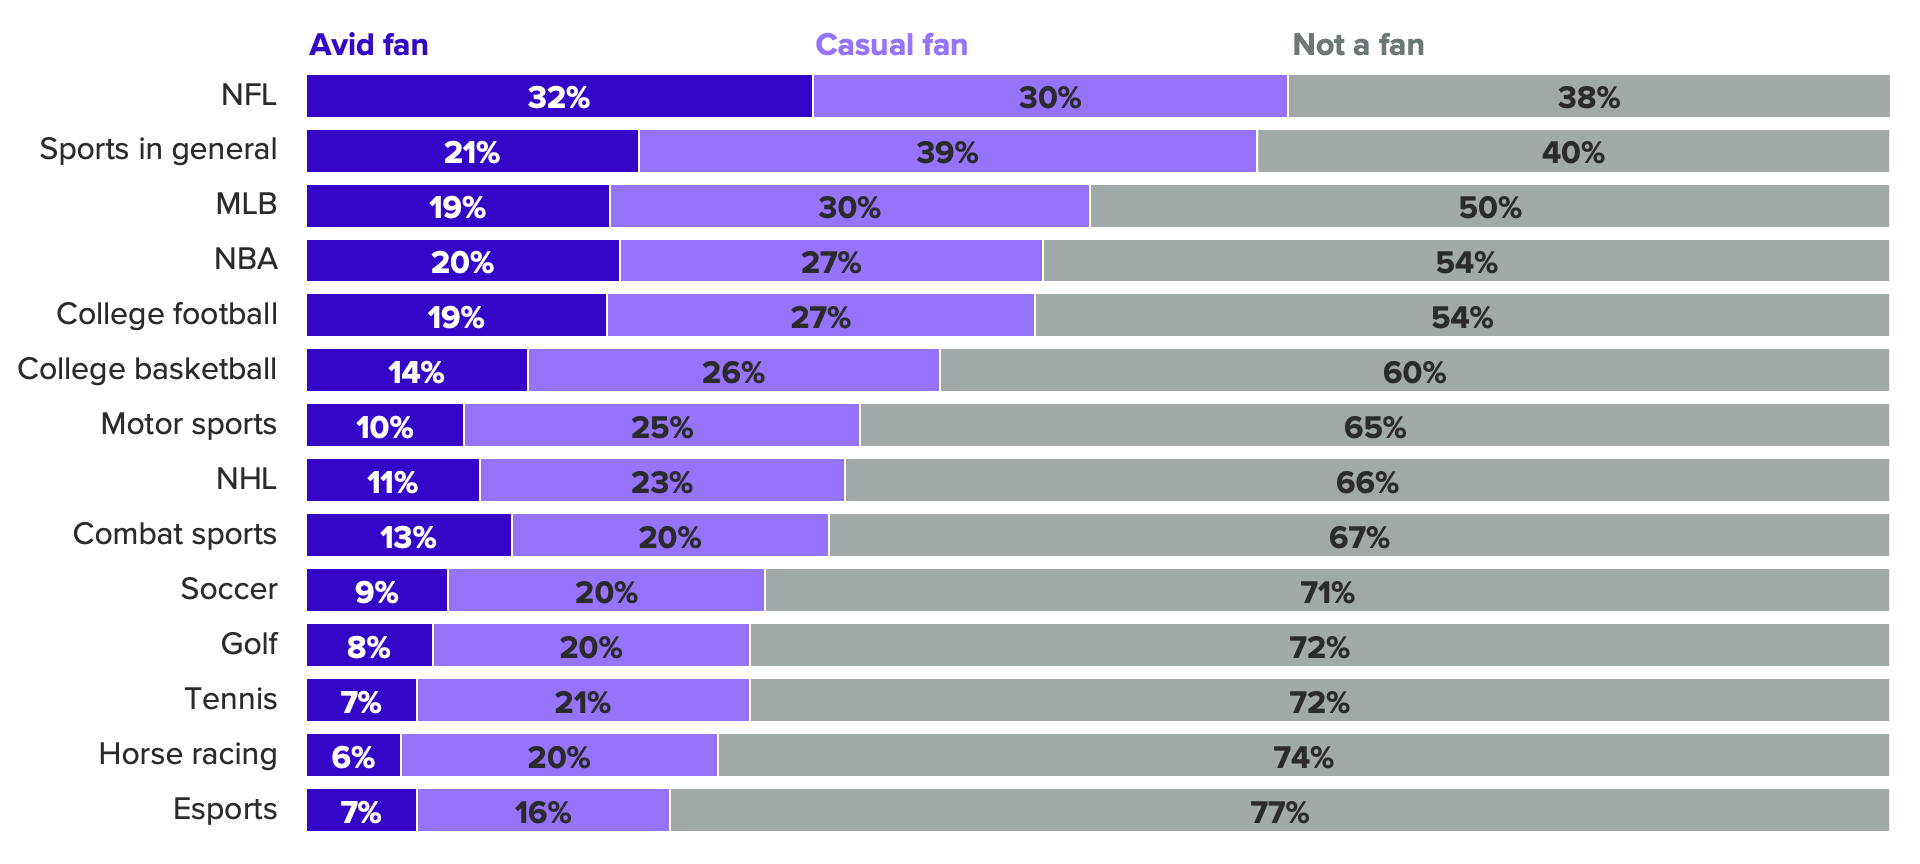 Bar chart of the fandom across sports and North American sports leagues, showing just 7% of U.S. adults said they considered themselves avid fans of esports.